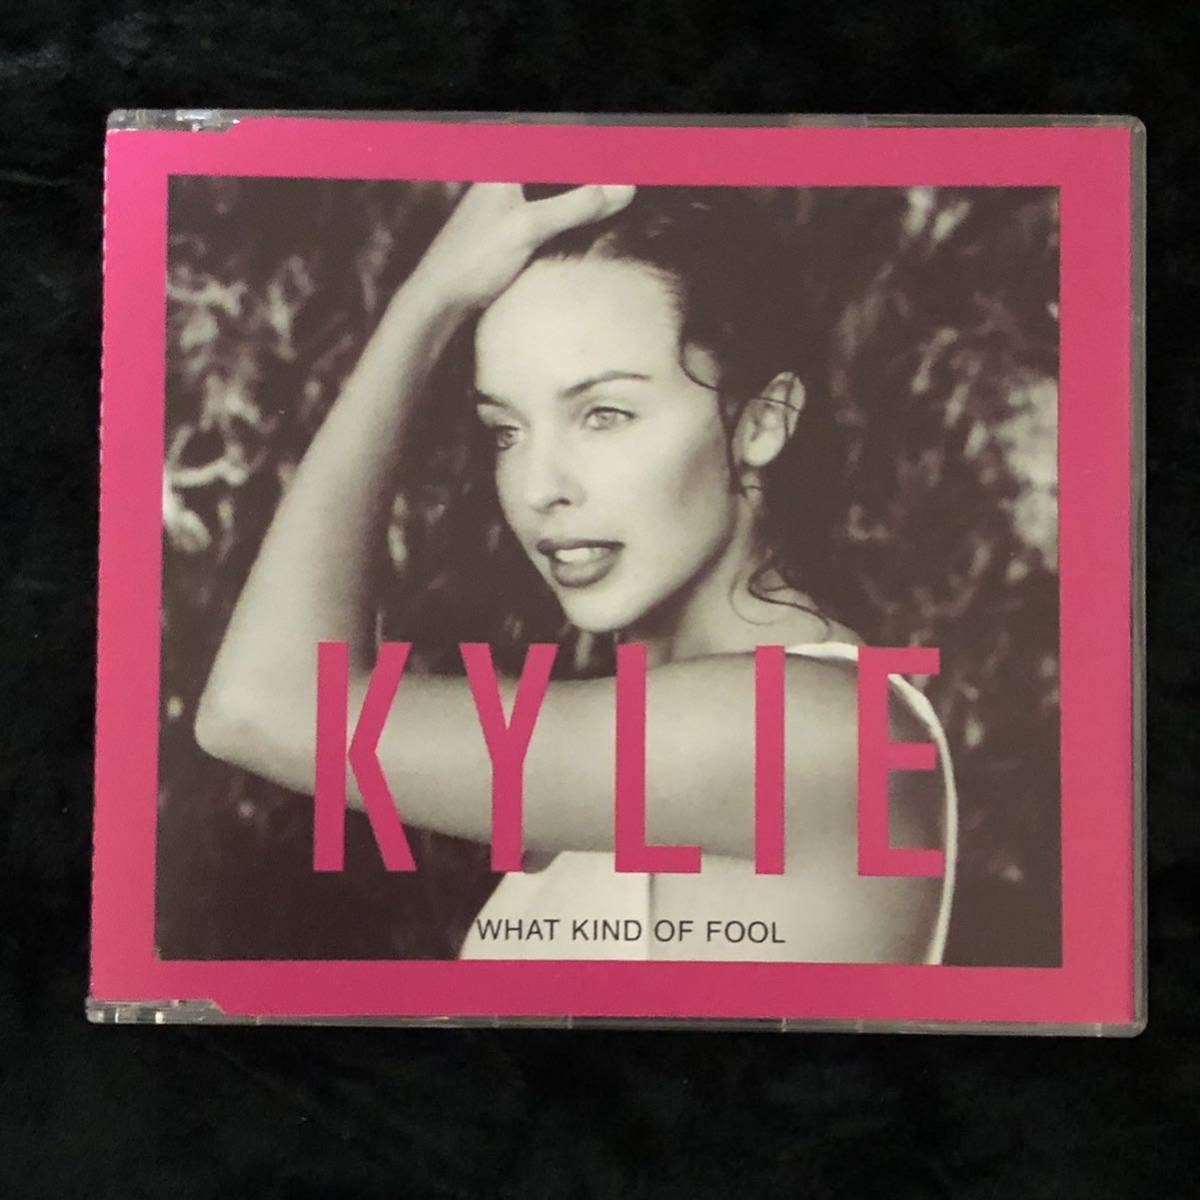 KYLIE - WHAT KIND OF FOOL (CD) EURO BEAT DISCO HOUSE Kylie Minogue_画像1